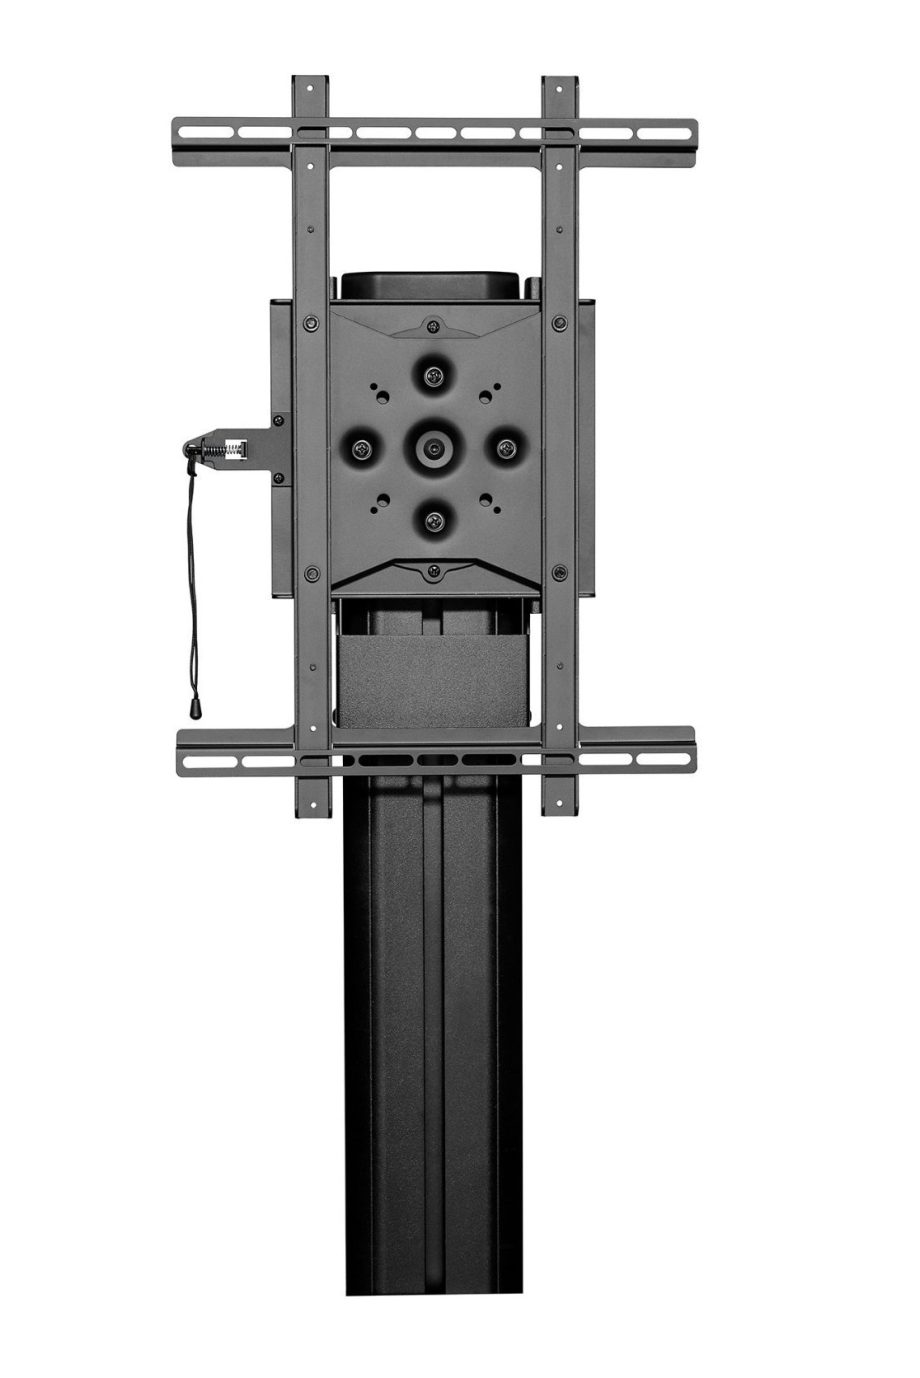 Peerless-AV RMI2C Rotational Mount Interface for Carts and Stands